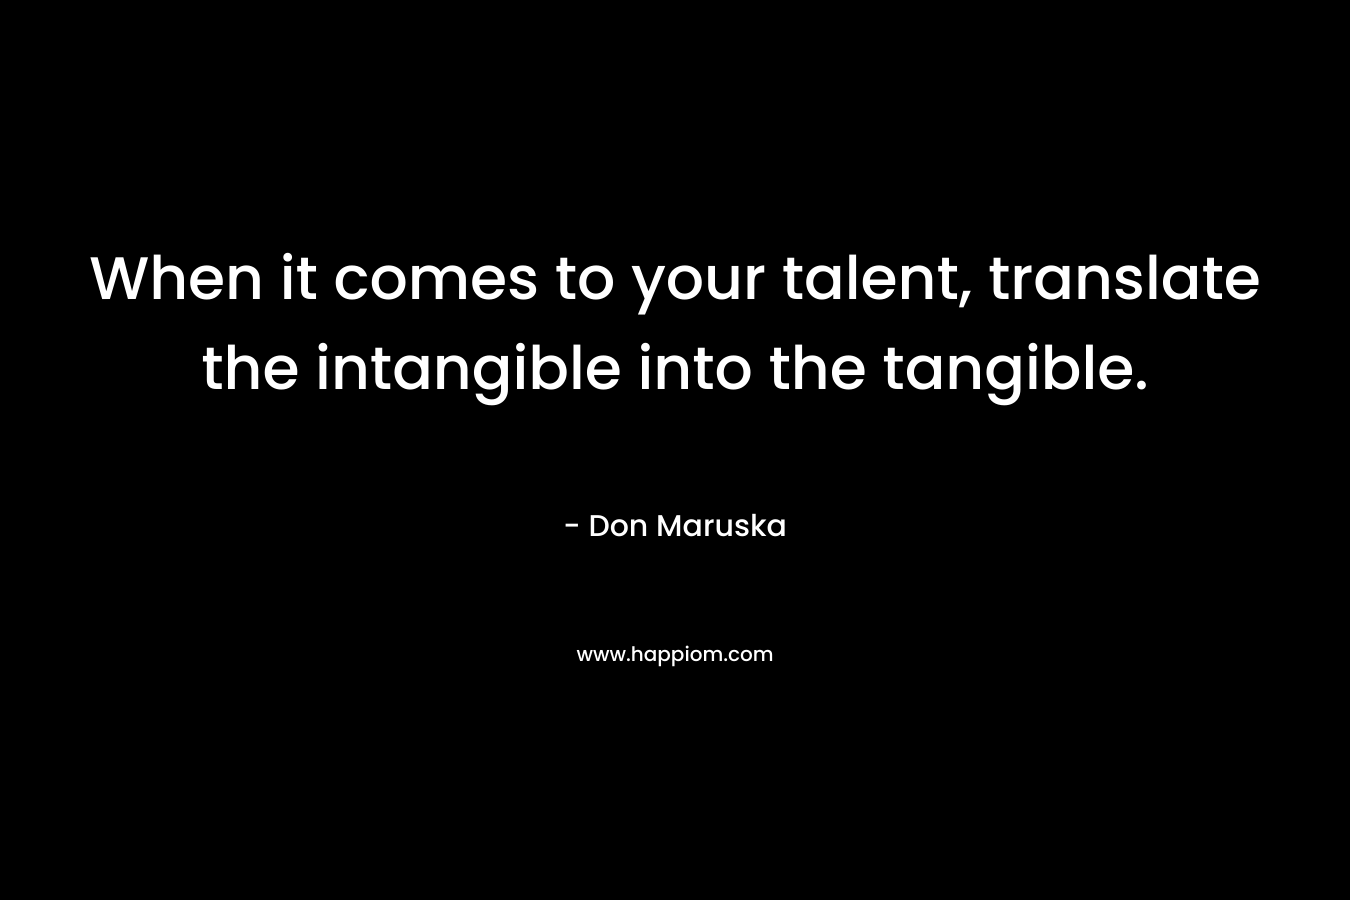 When it comes to your talent, translate the intangible into the tangible.